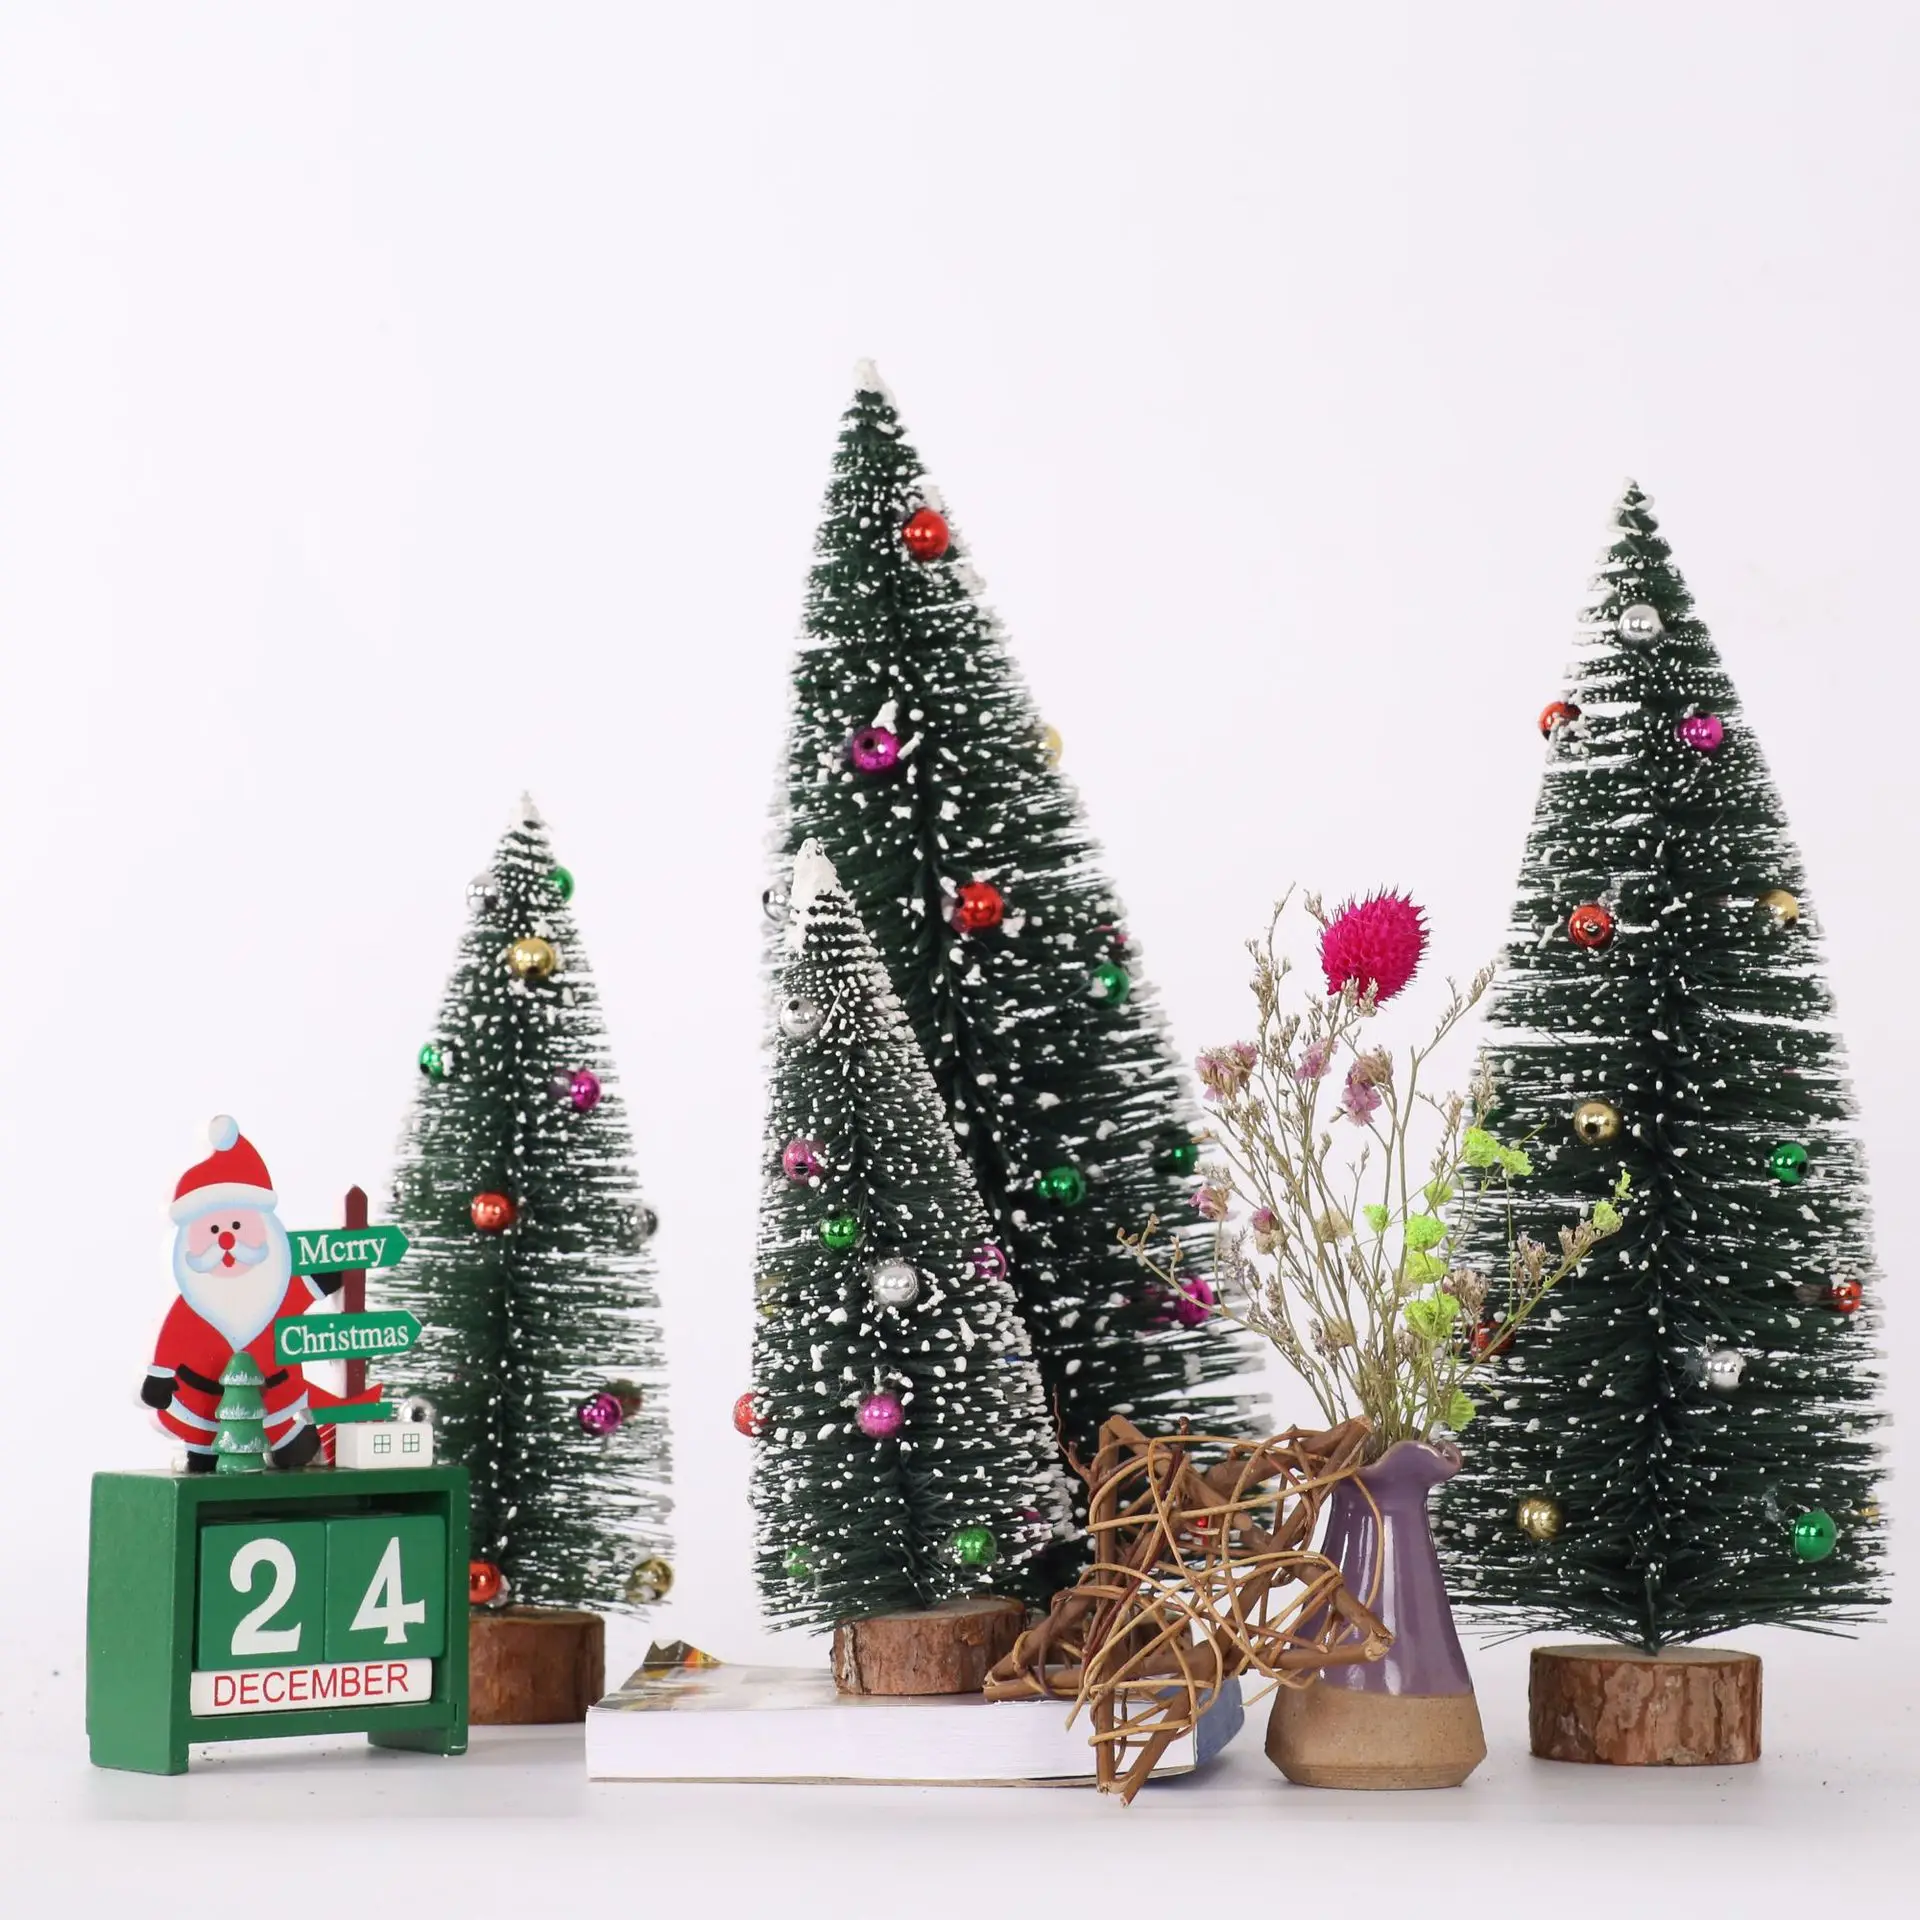 Christmas Tree Mini Tree with Wood Base Diy Crafts Home Table Top Decor Xmas Wooden Pendants for New Year Home Decoración